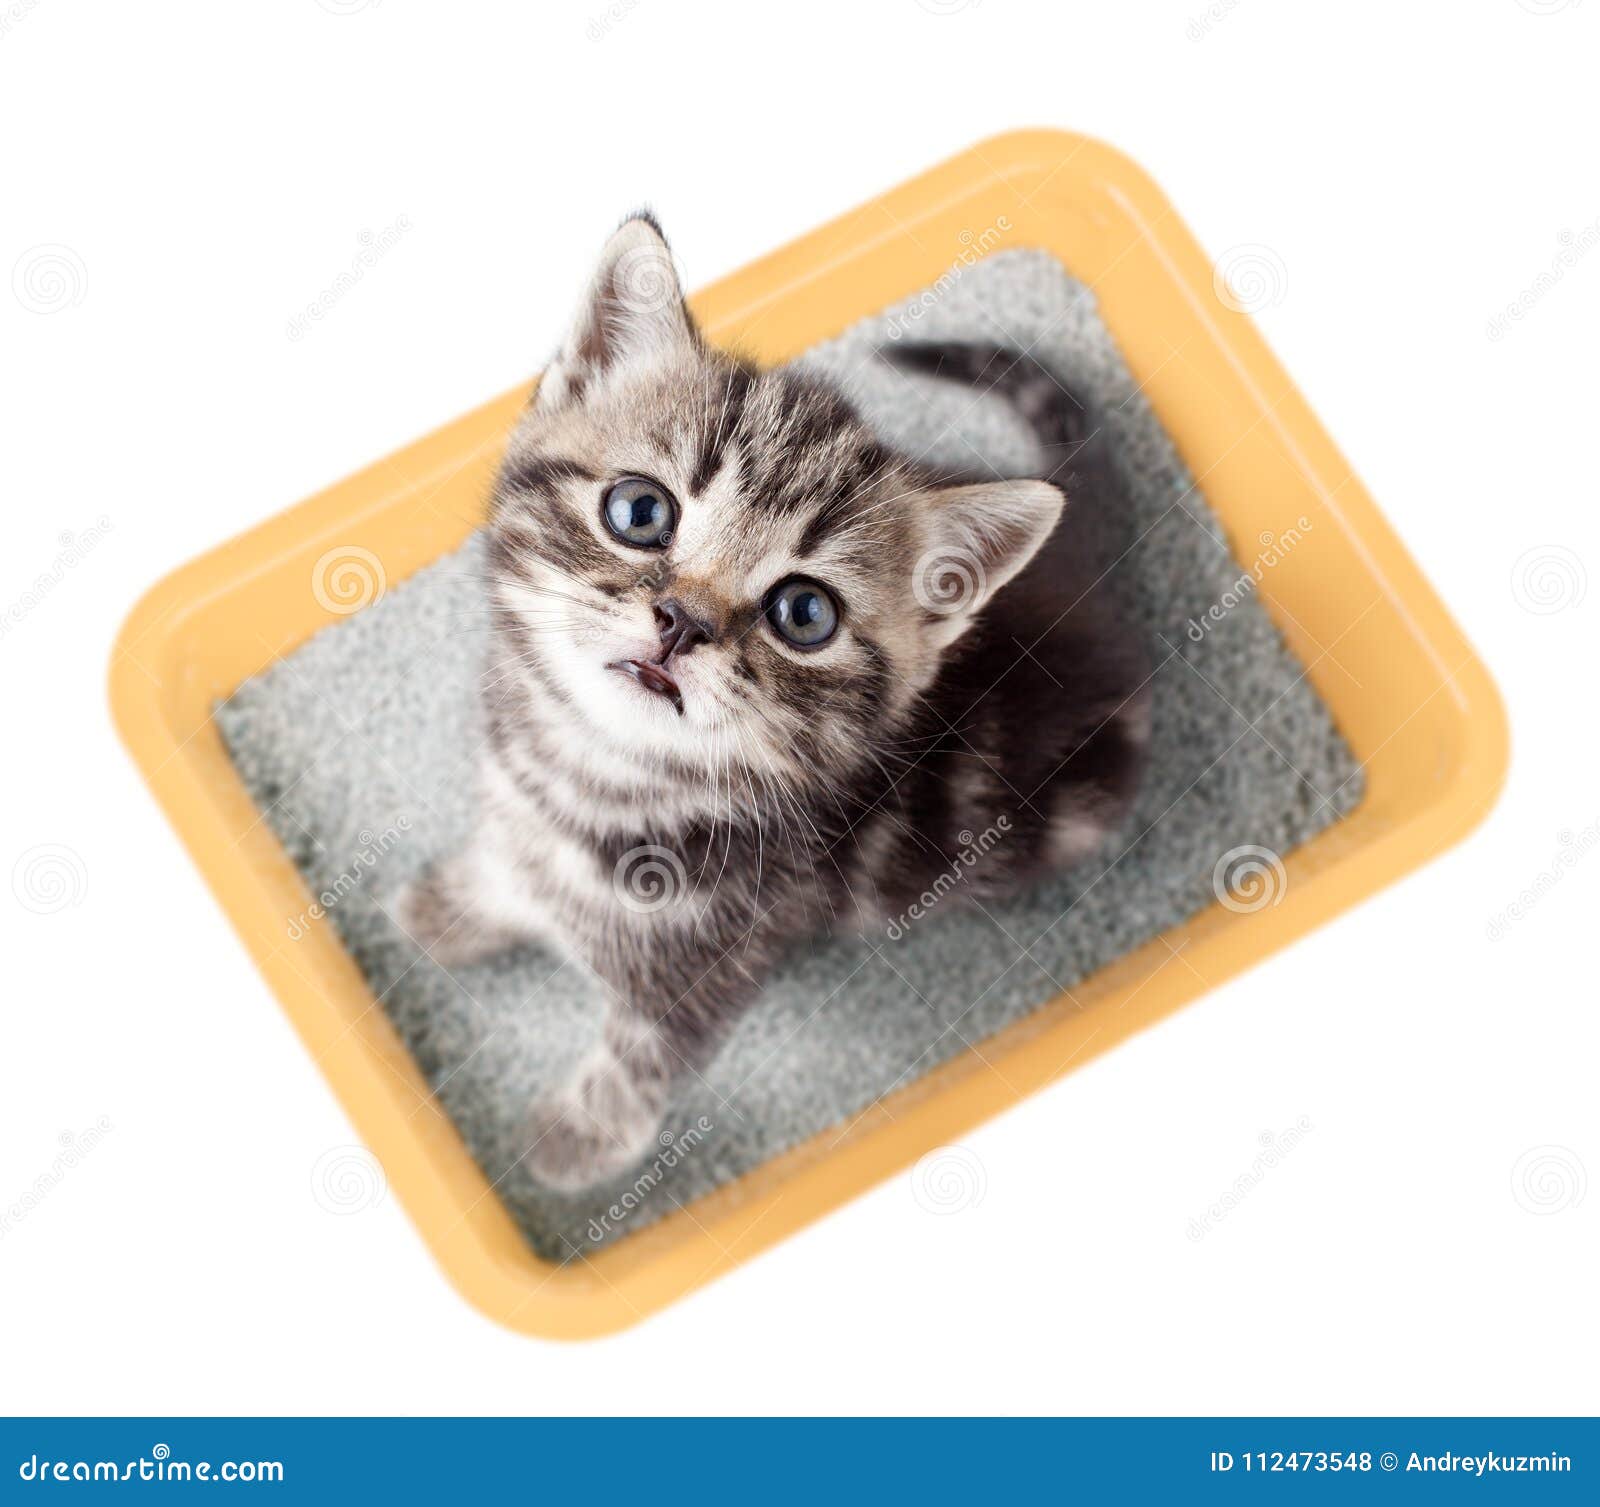 cat top view sitting in yellow litter box 